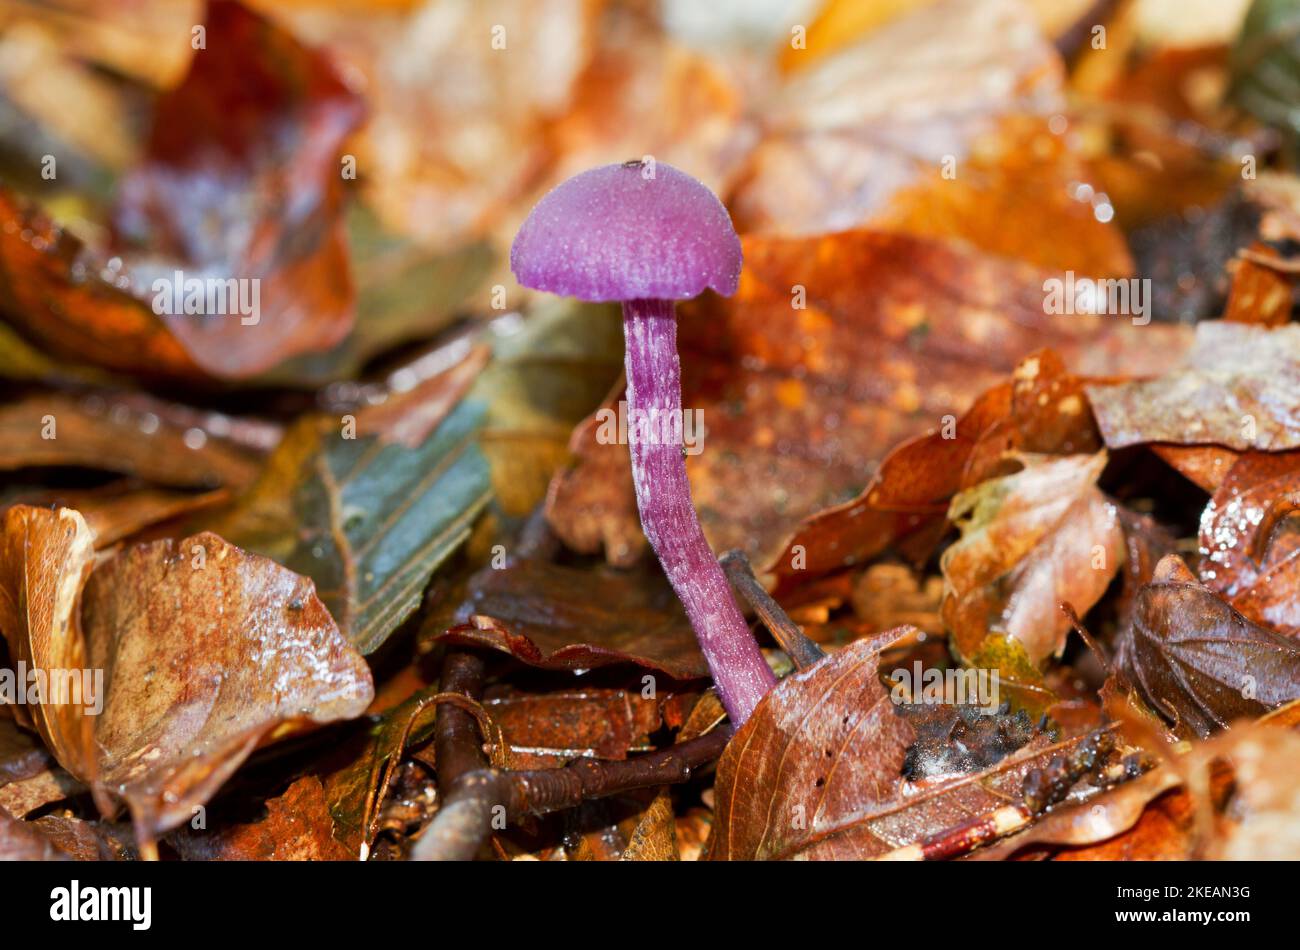 Tiny purple colored mushroom, an Amethyst deceiver, between brown, withered, fallen leaves of Beech Stock Photo